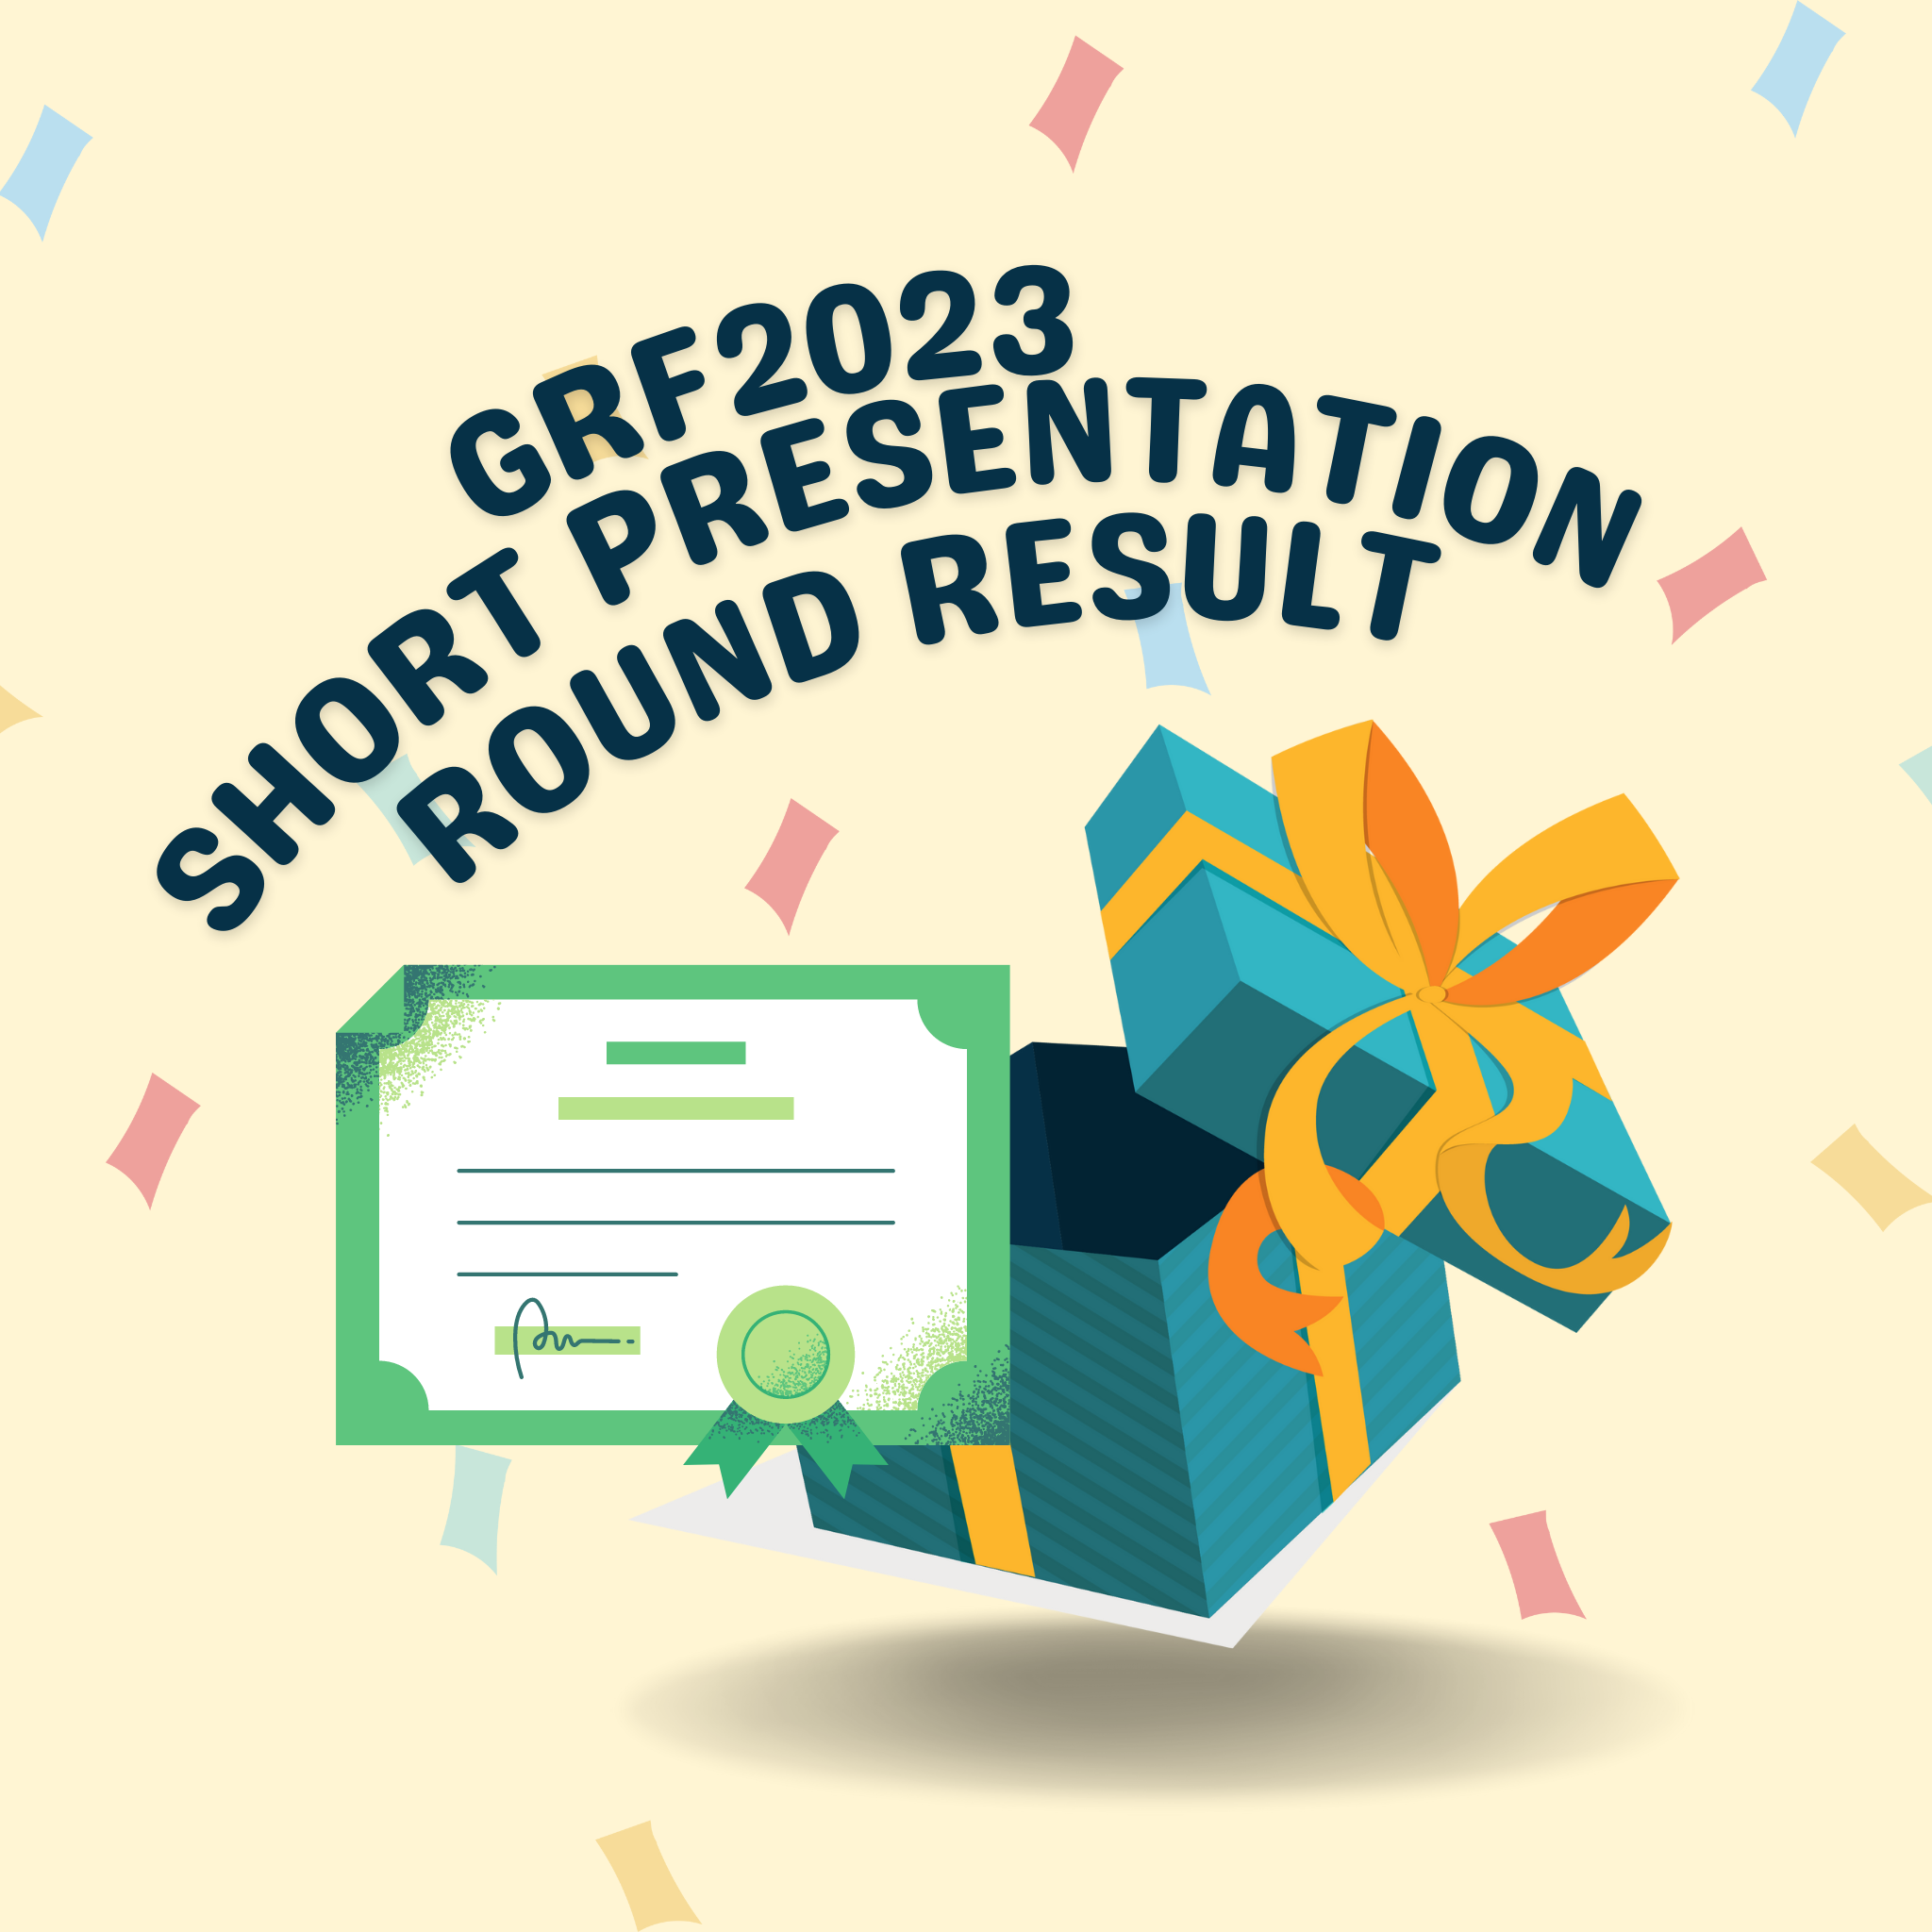 The Short Presentation Round Result of the Graduate Research Forum 2023